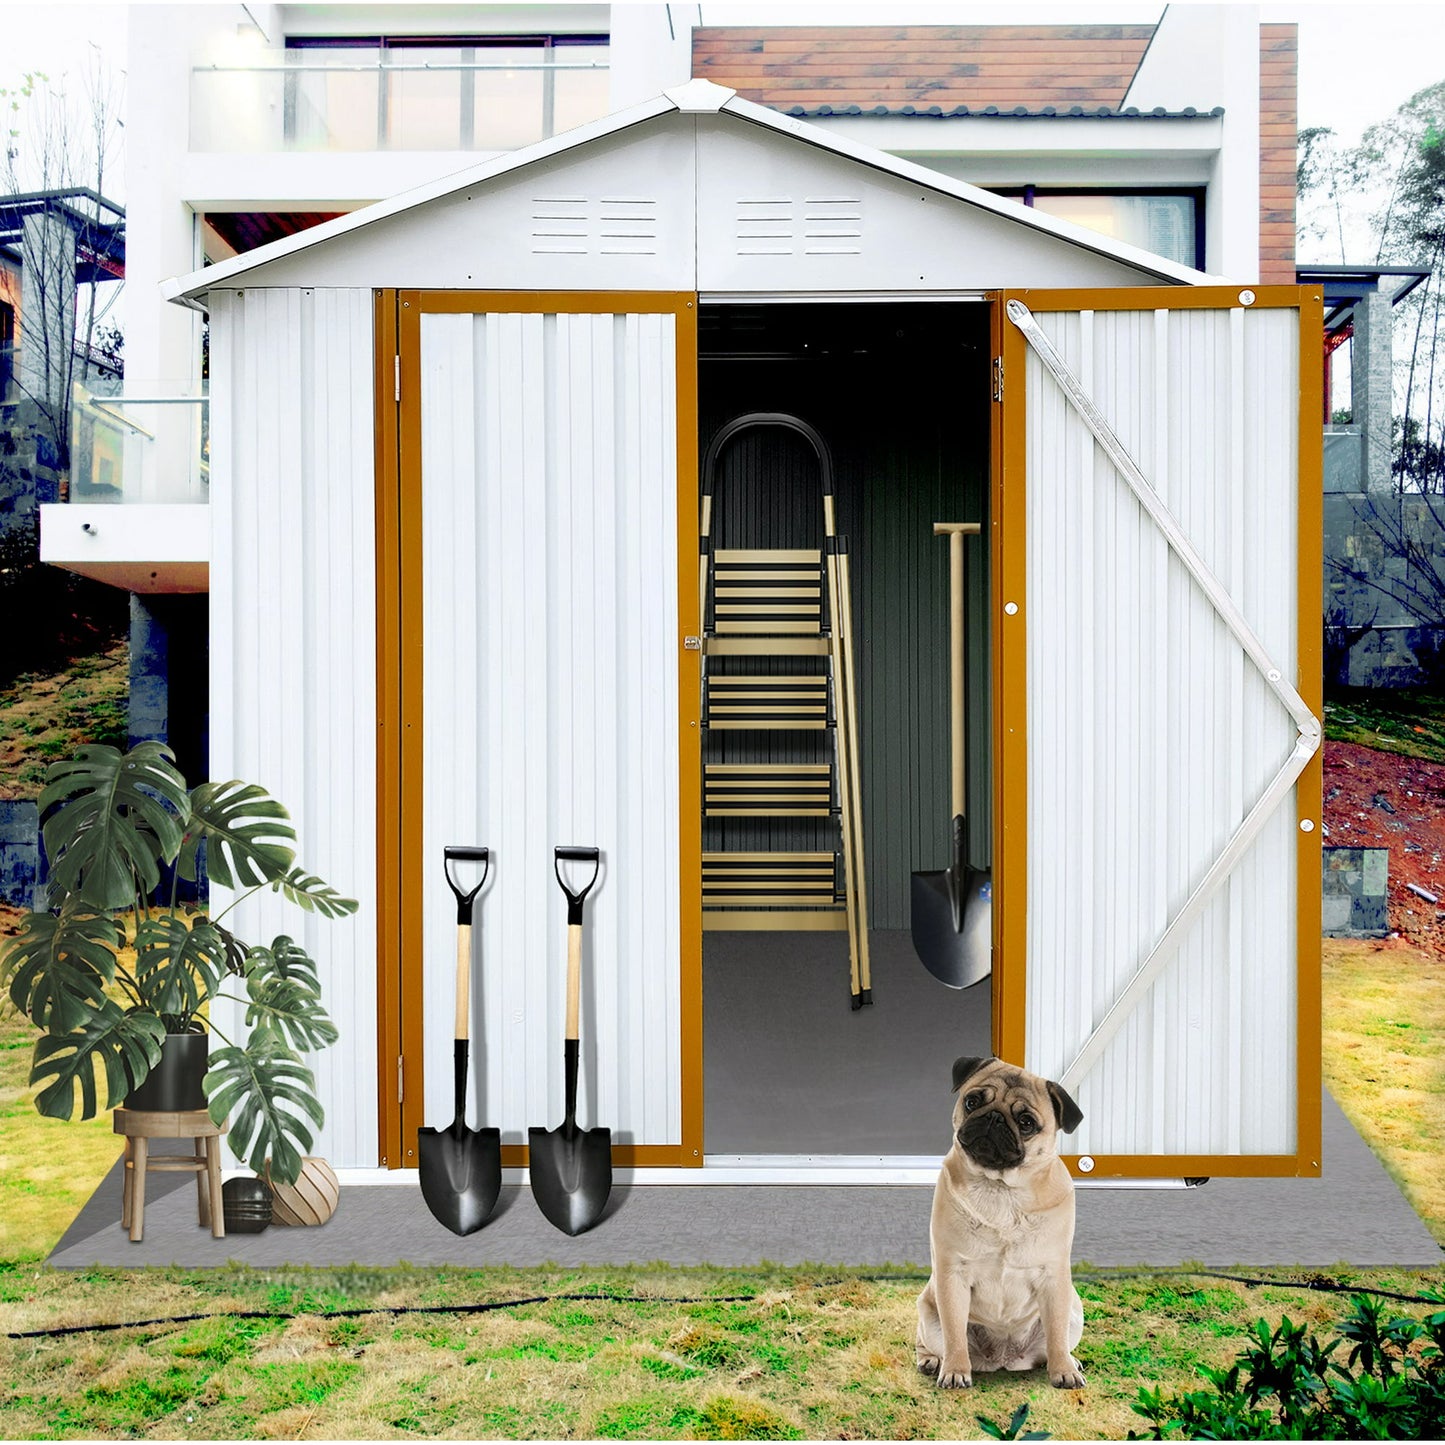 SYNGAR Outdoor Shed 6 x 4 ft, Patio Tool Storage Shed Galvanized Metal Storage Shed with Lockable Door Sloped Roof Lawn Backyard Garden, Waterproof & UV-proof, White